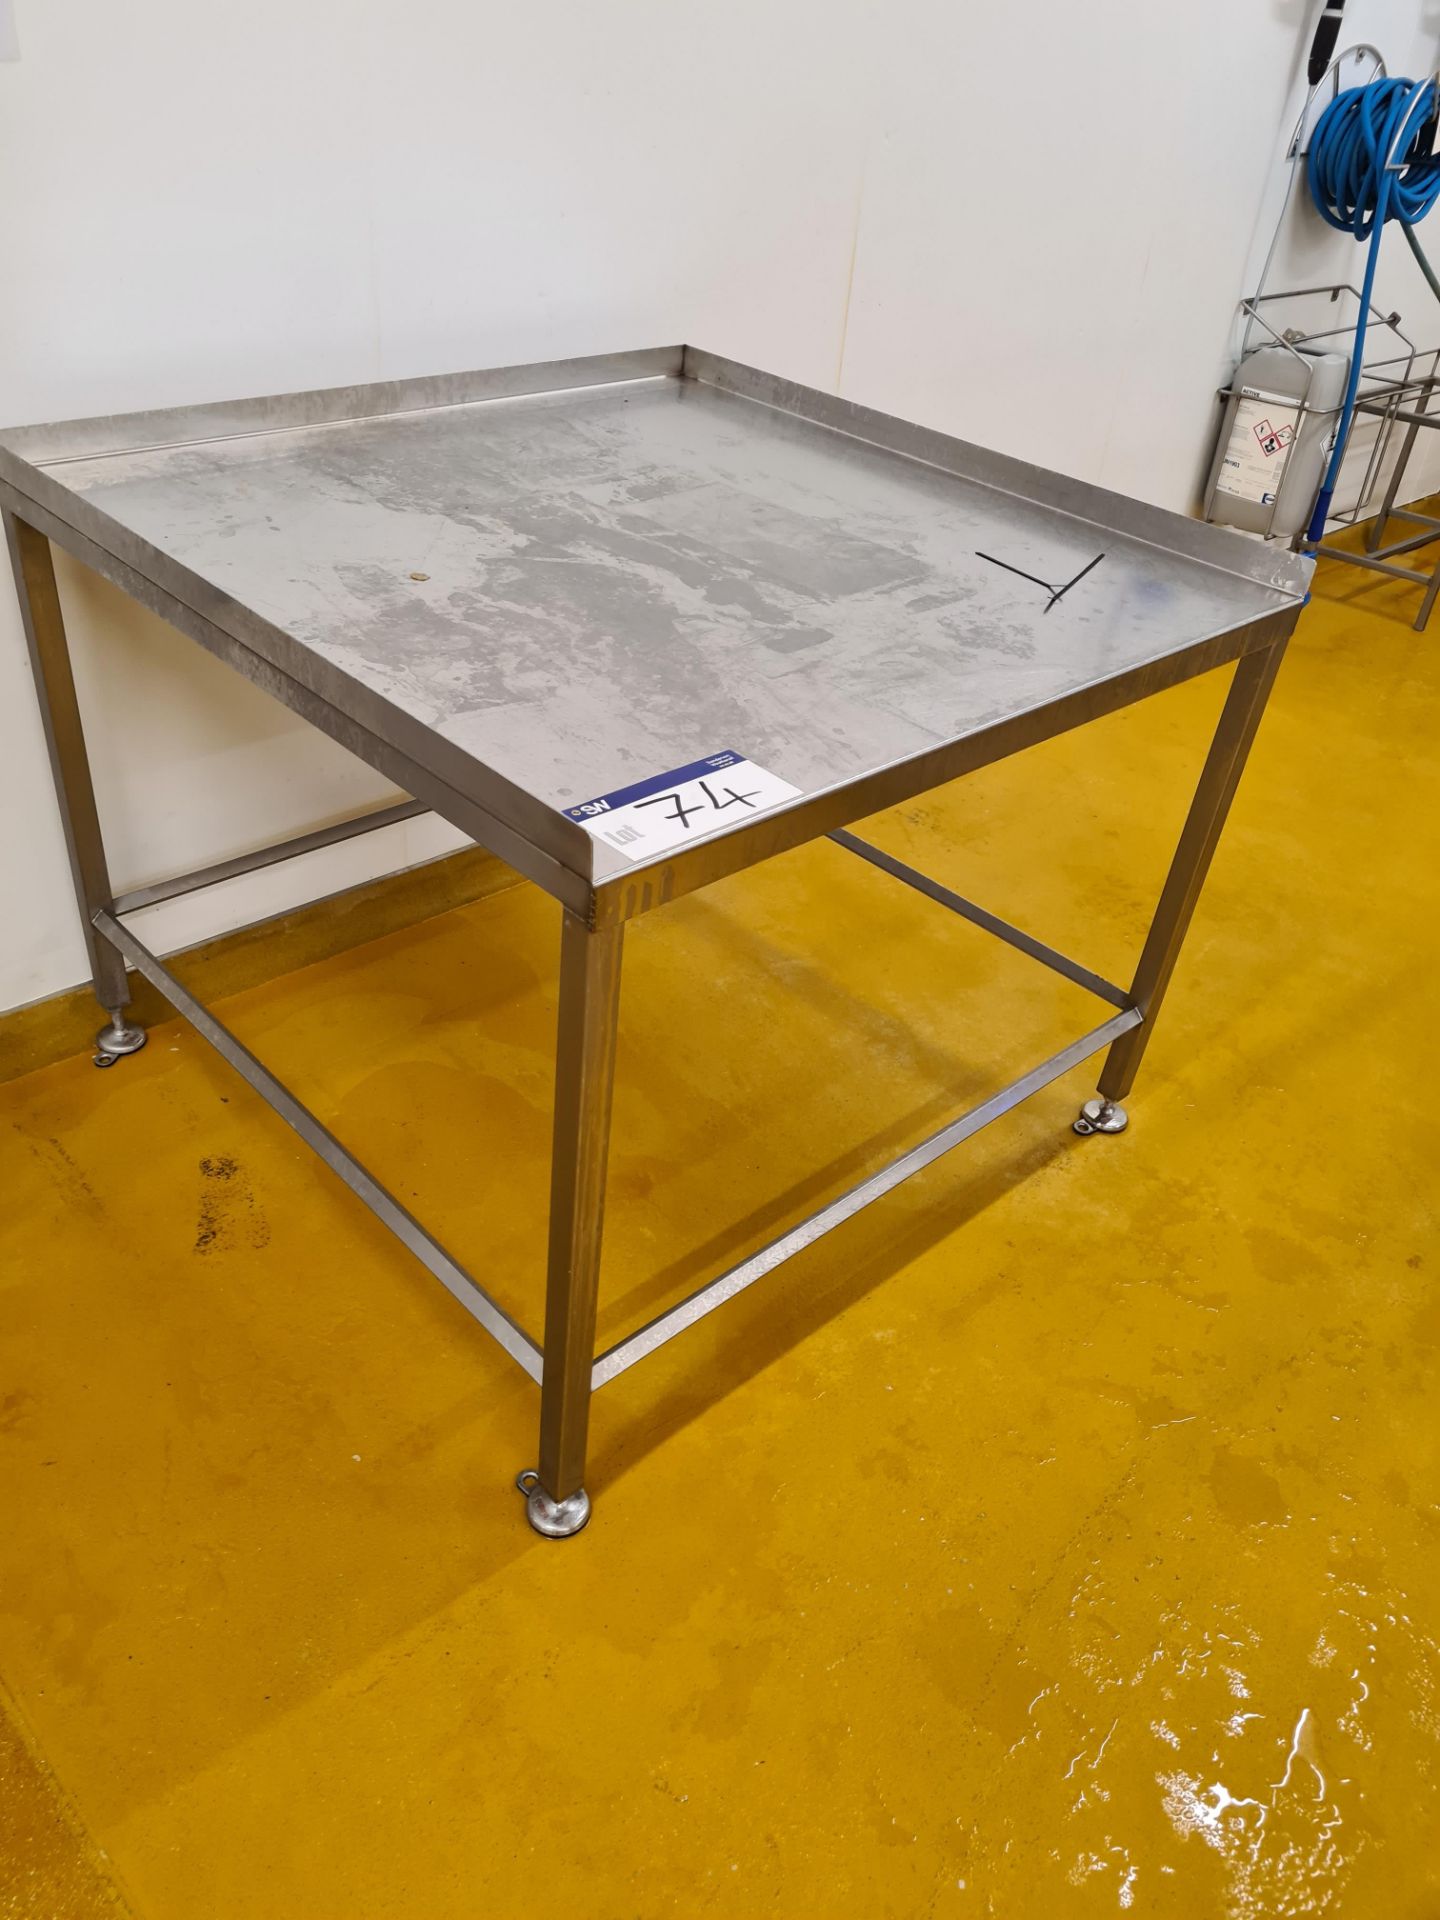 Stainless Steel Bench, approx. 1.2m x 1.2mPlease read the following important notes:- ***Overseas